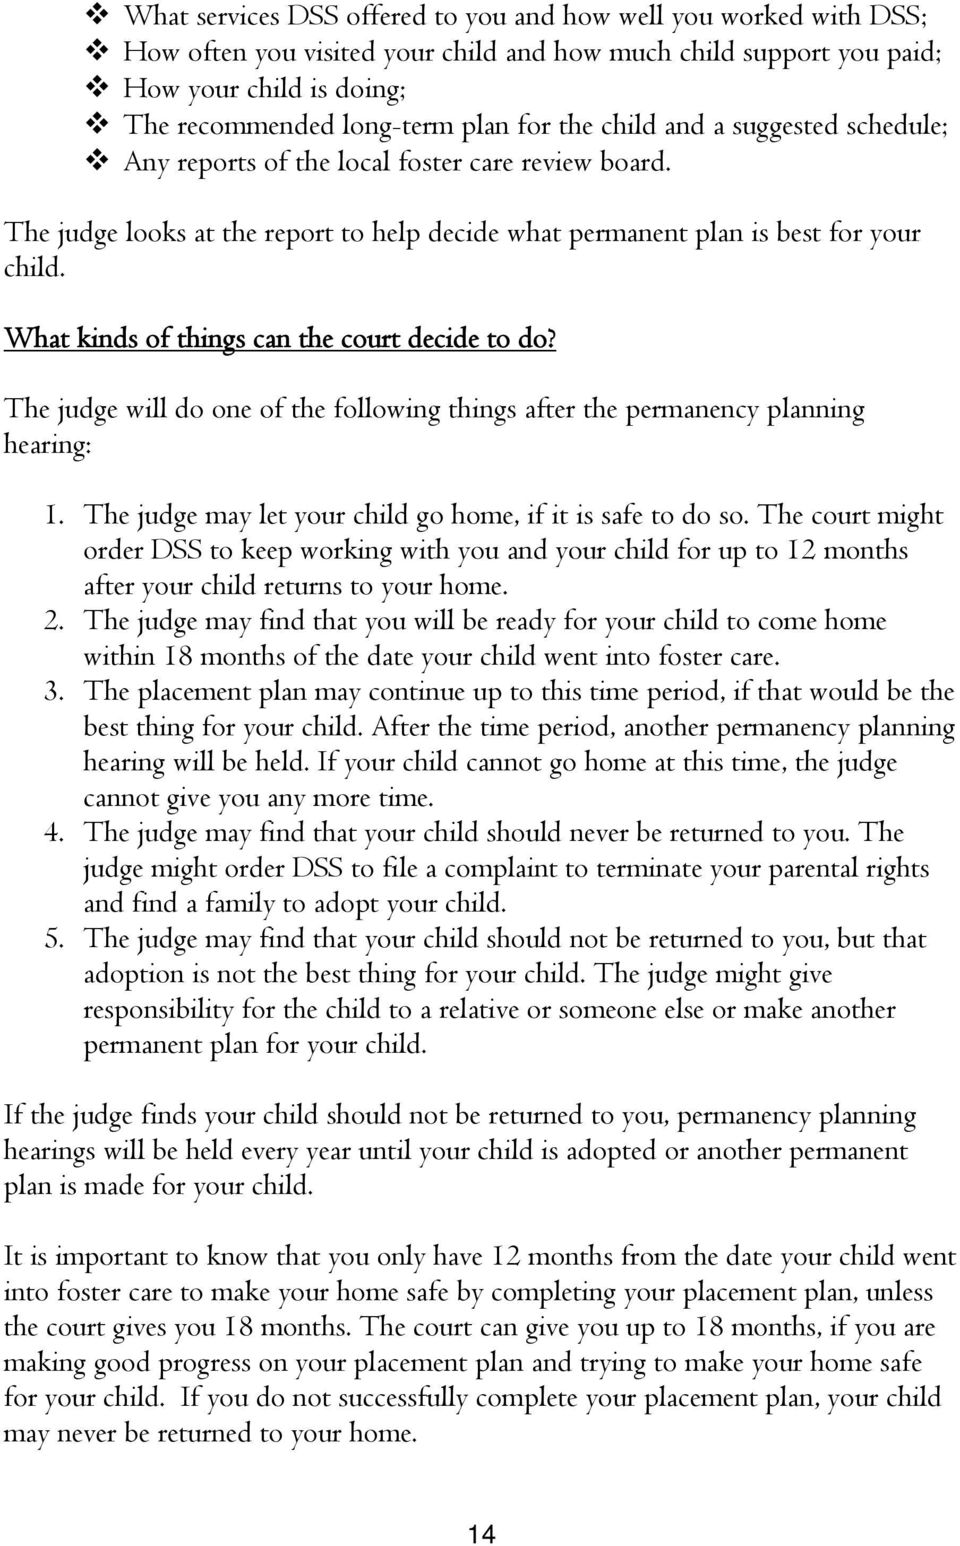 What kinds of things can the court decide to do? The judge will do one of the following things after the permanency planning hearing: 1. The judge may let your child go home, if it is safe to do so.